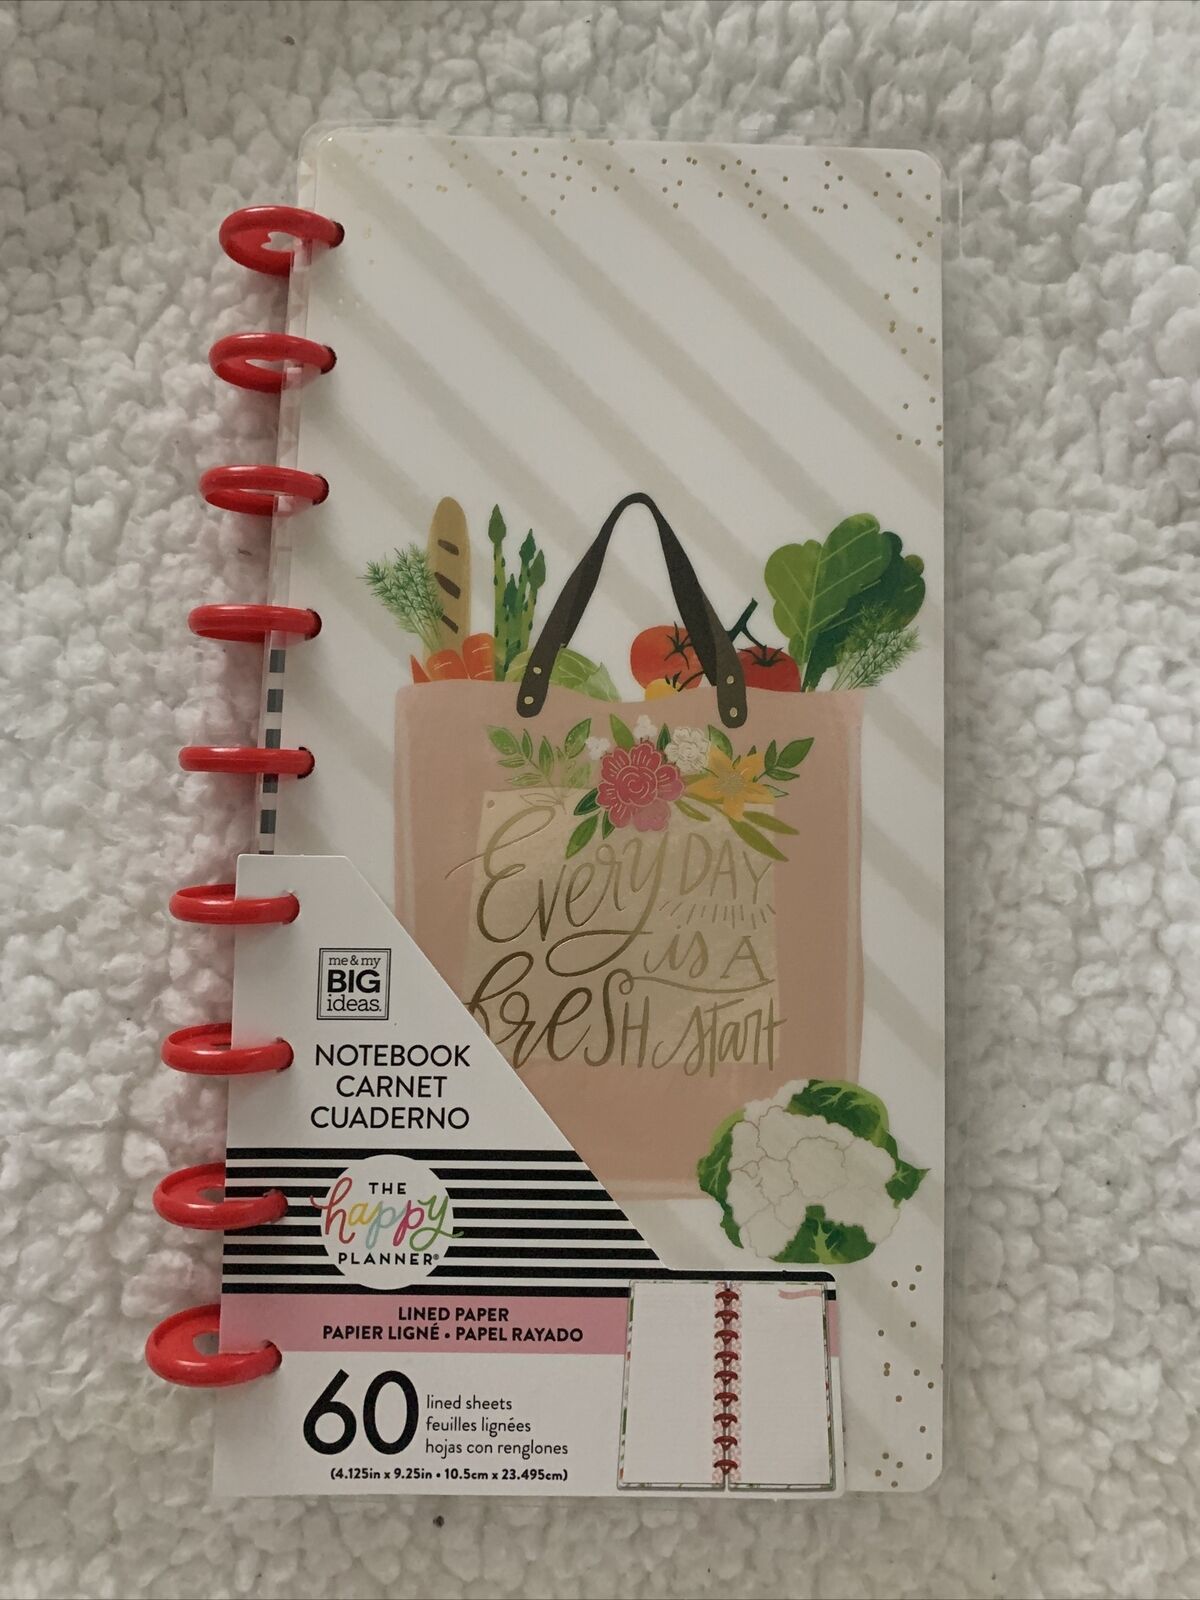 Mambi The Happy Planner Notes Notebook Lined Paper Food Classic Size